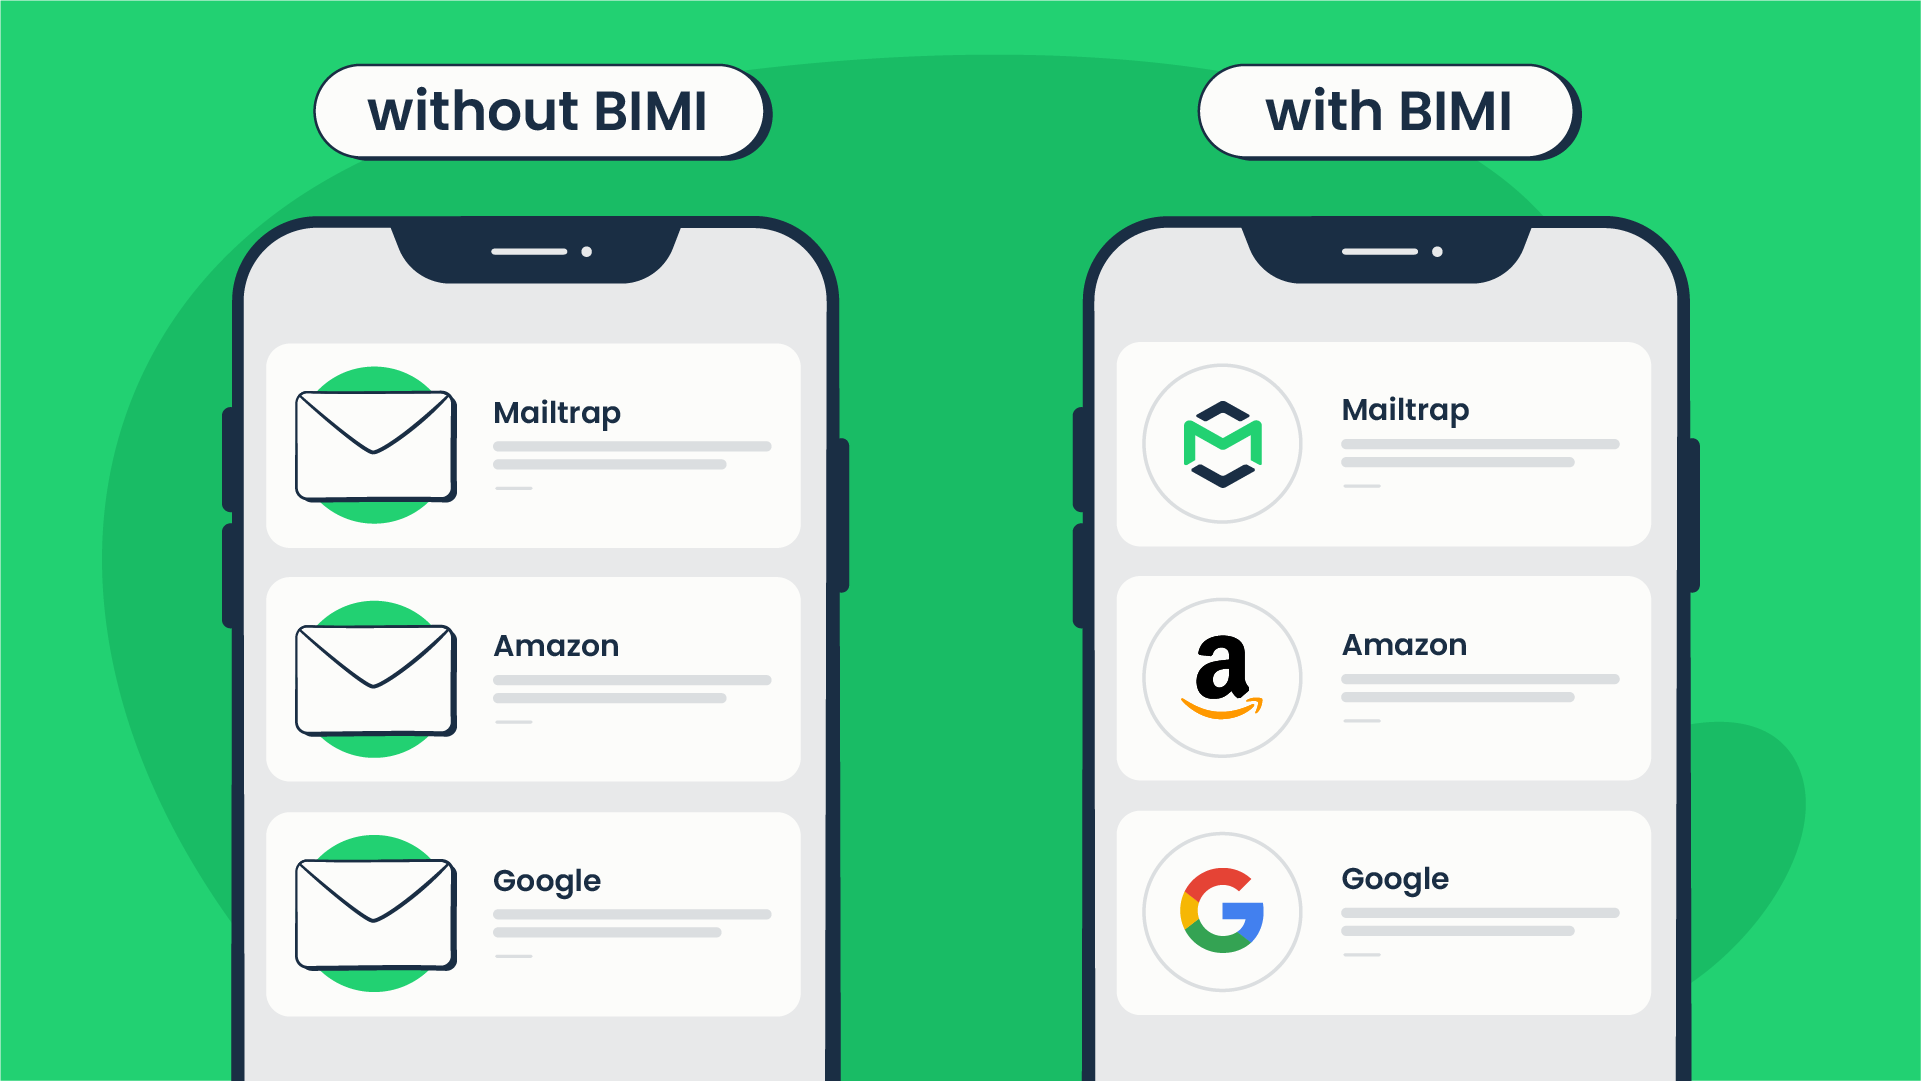 Emails with BIMI and emails without BIMI